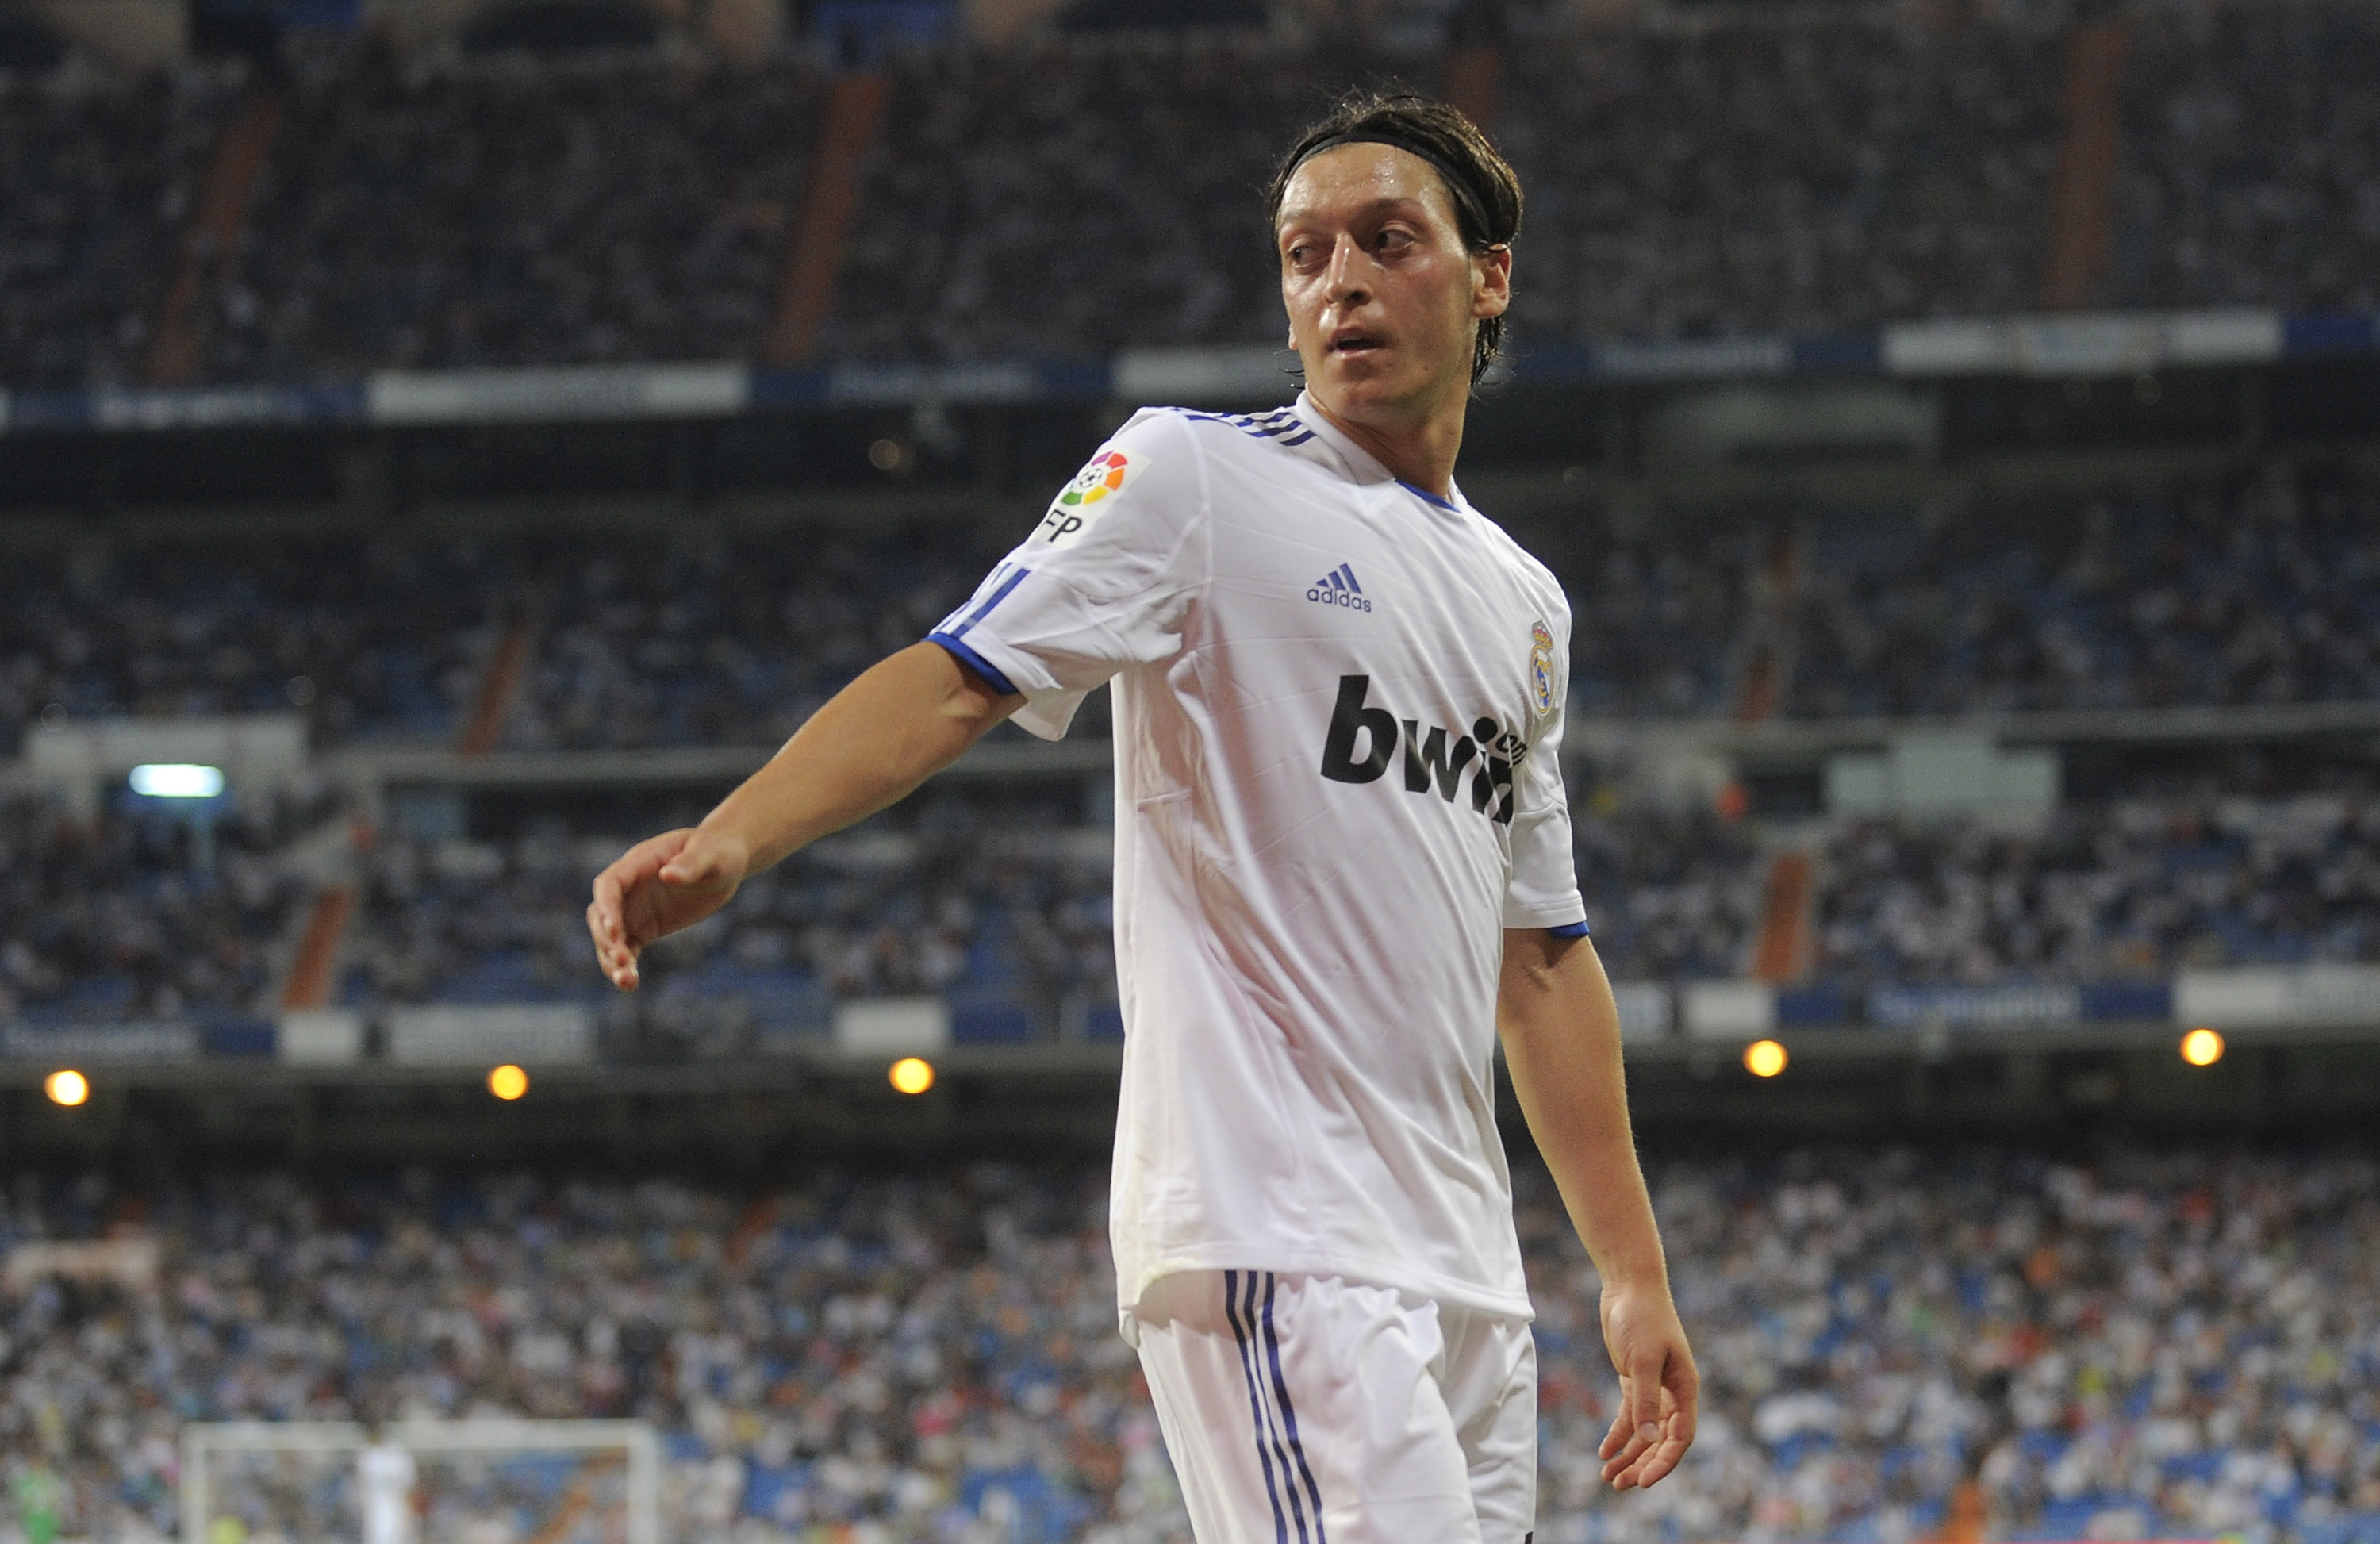 MADRID, SPAIN - MAY 21: Mesut Ozil of Real Madrid goes to take a corner kick  during the La Liga match between Real Madrid and UD Almeria at Estadio Santiago Bernabeu on May 21, 2011 in Madrid, Spain.  (Photo by Denis Doyle/Getty Images)